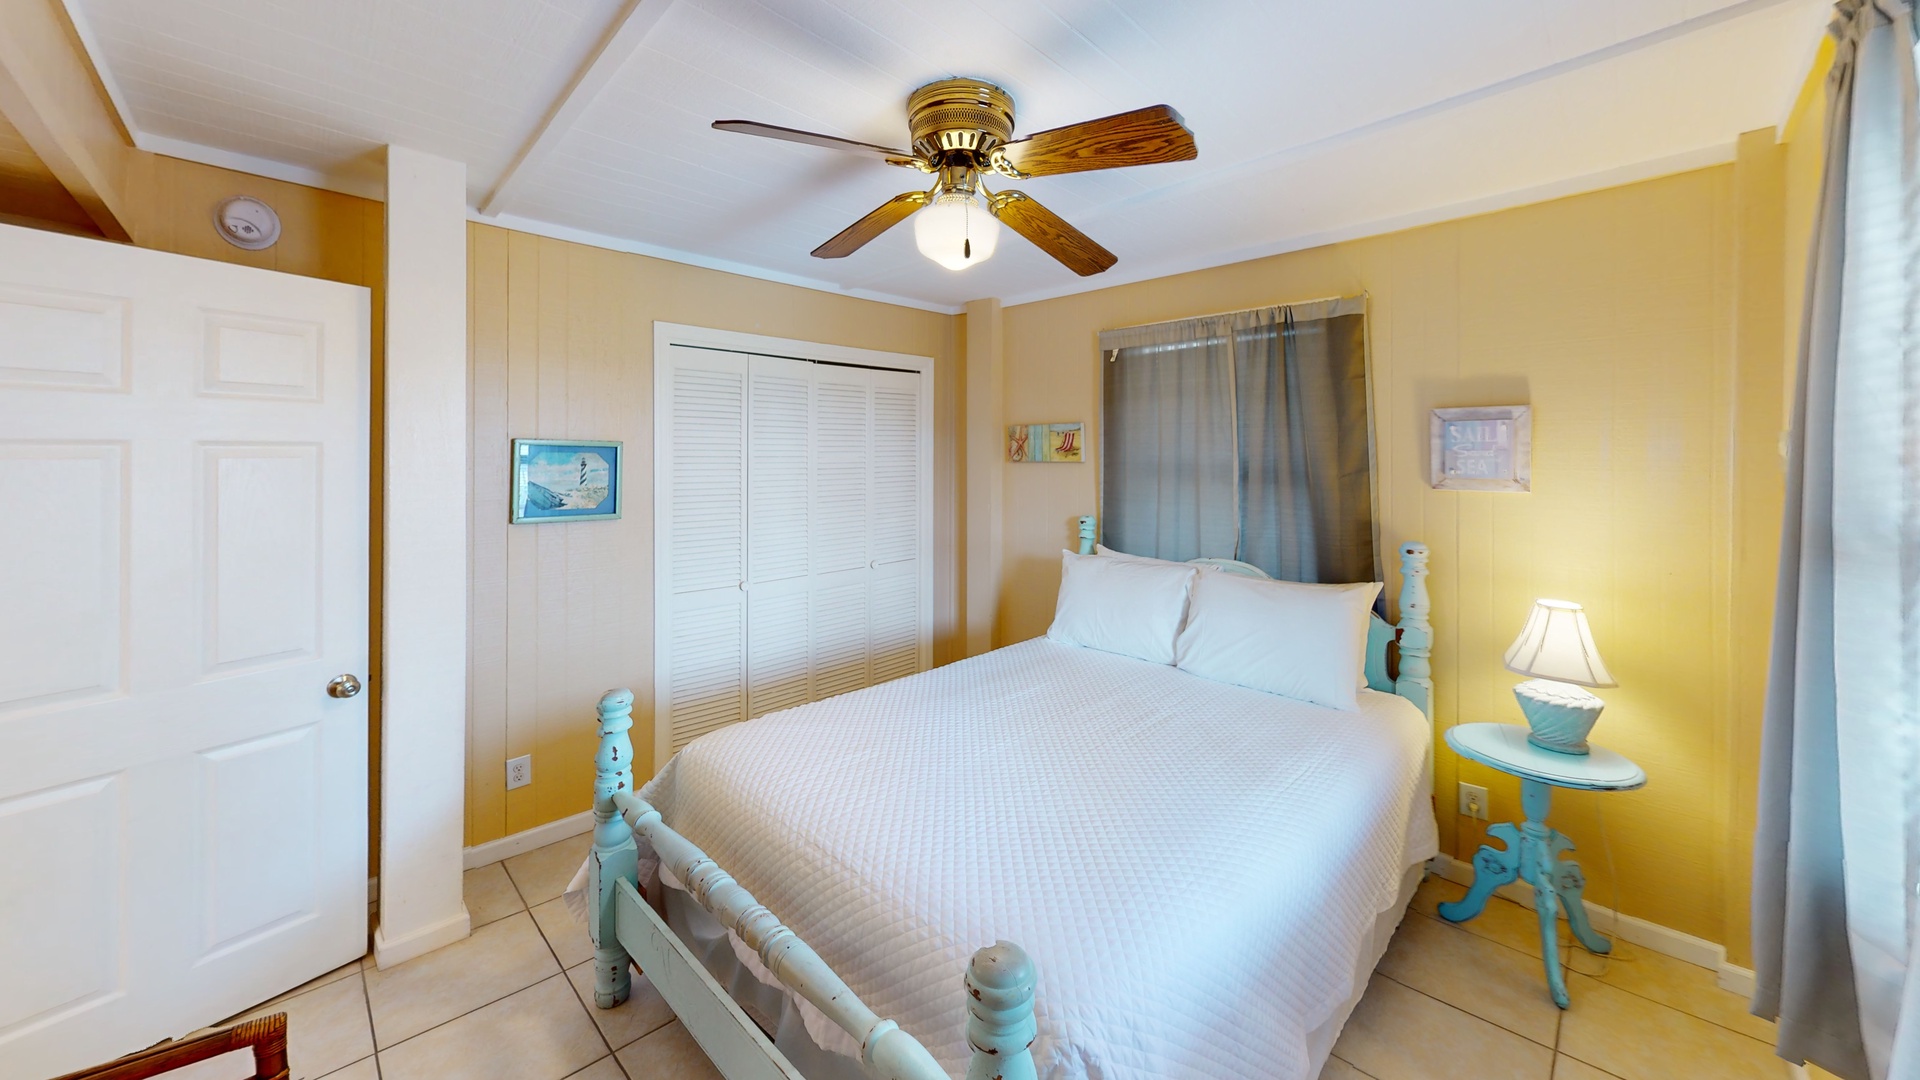 1st floor, bedroom #5 has a queen bed and a ceiling fan